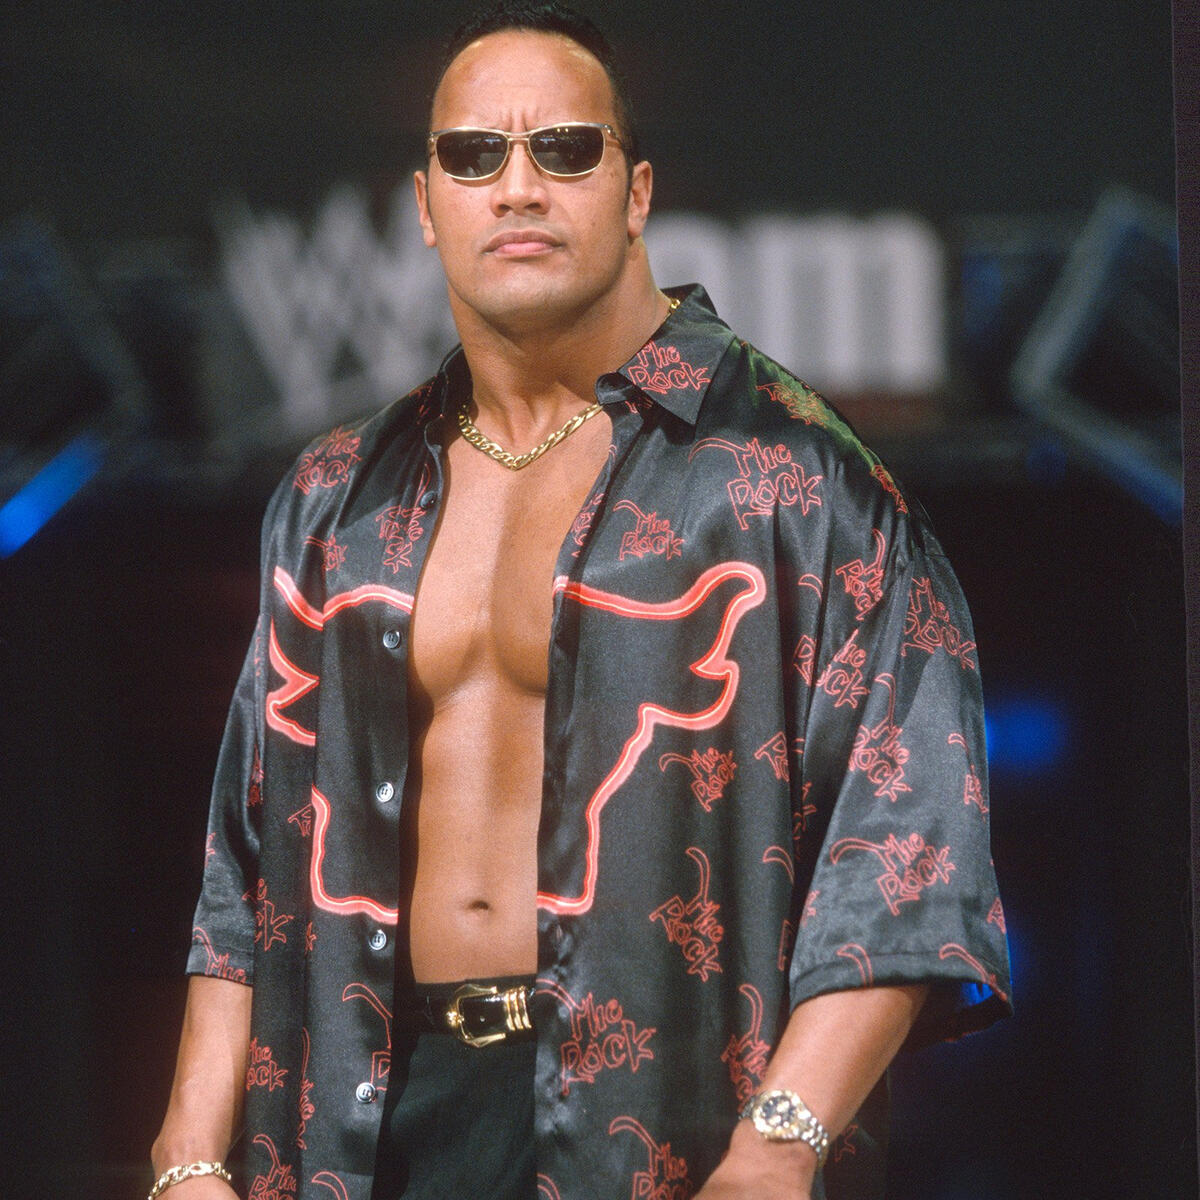 The Rock - WWE - Image Abyss